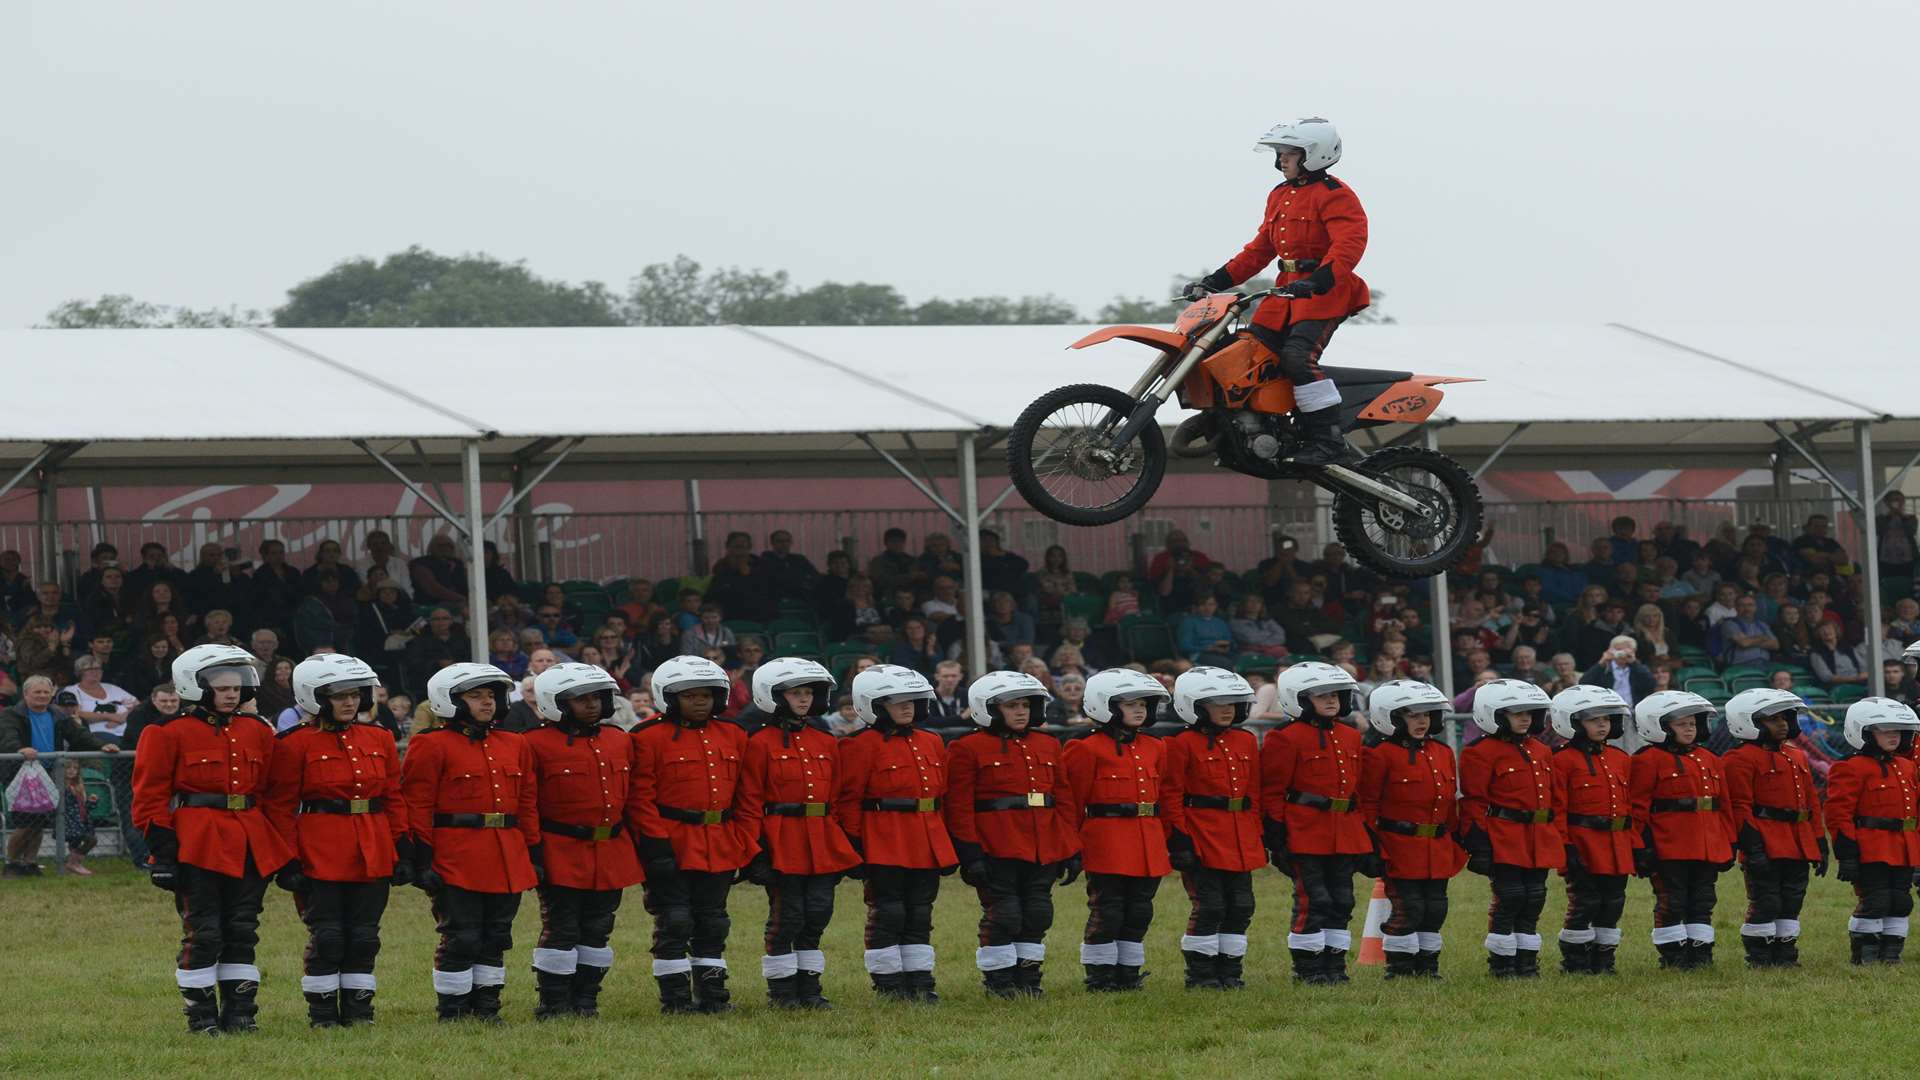 The Imps motocycle display team at the Kent County Show